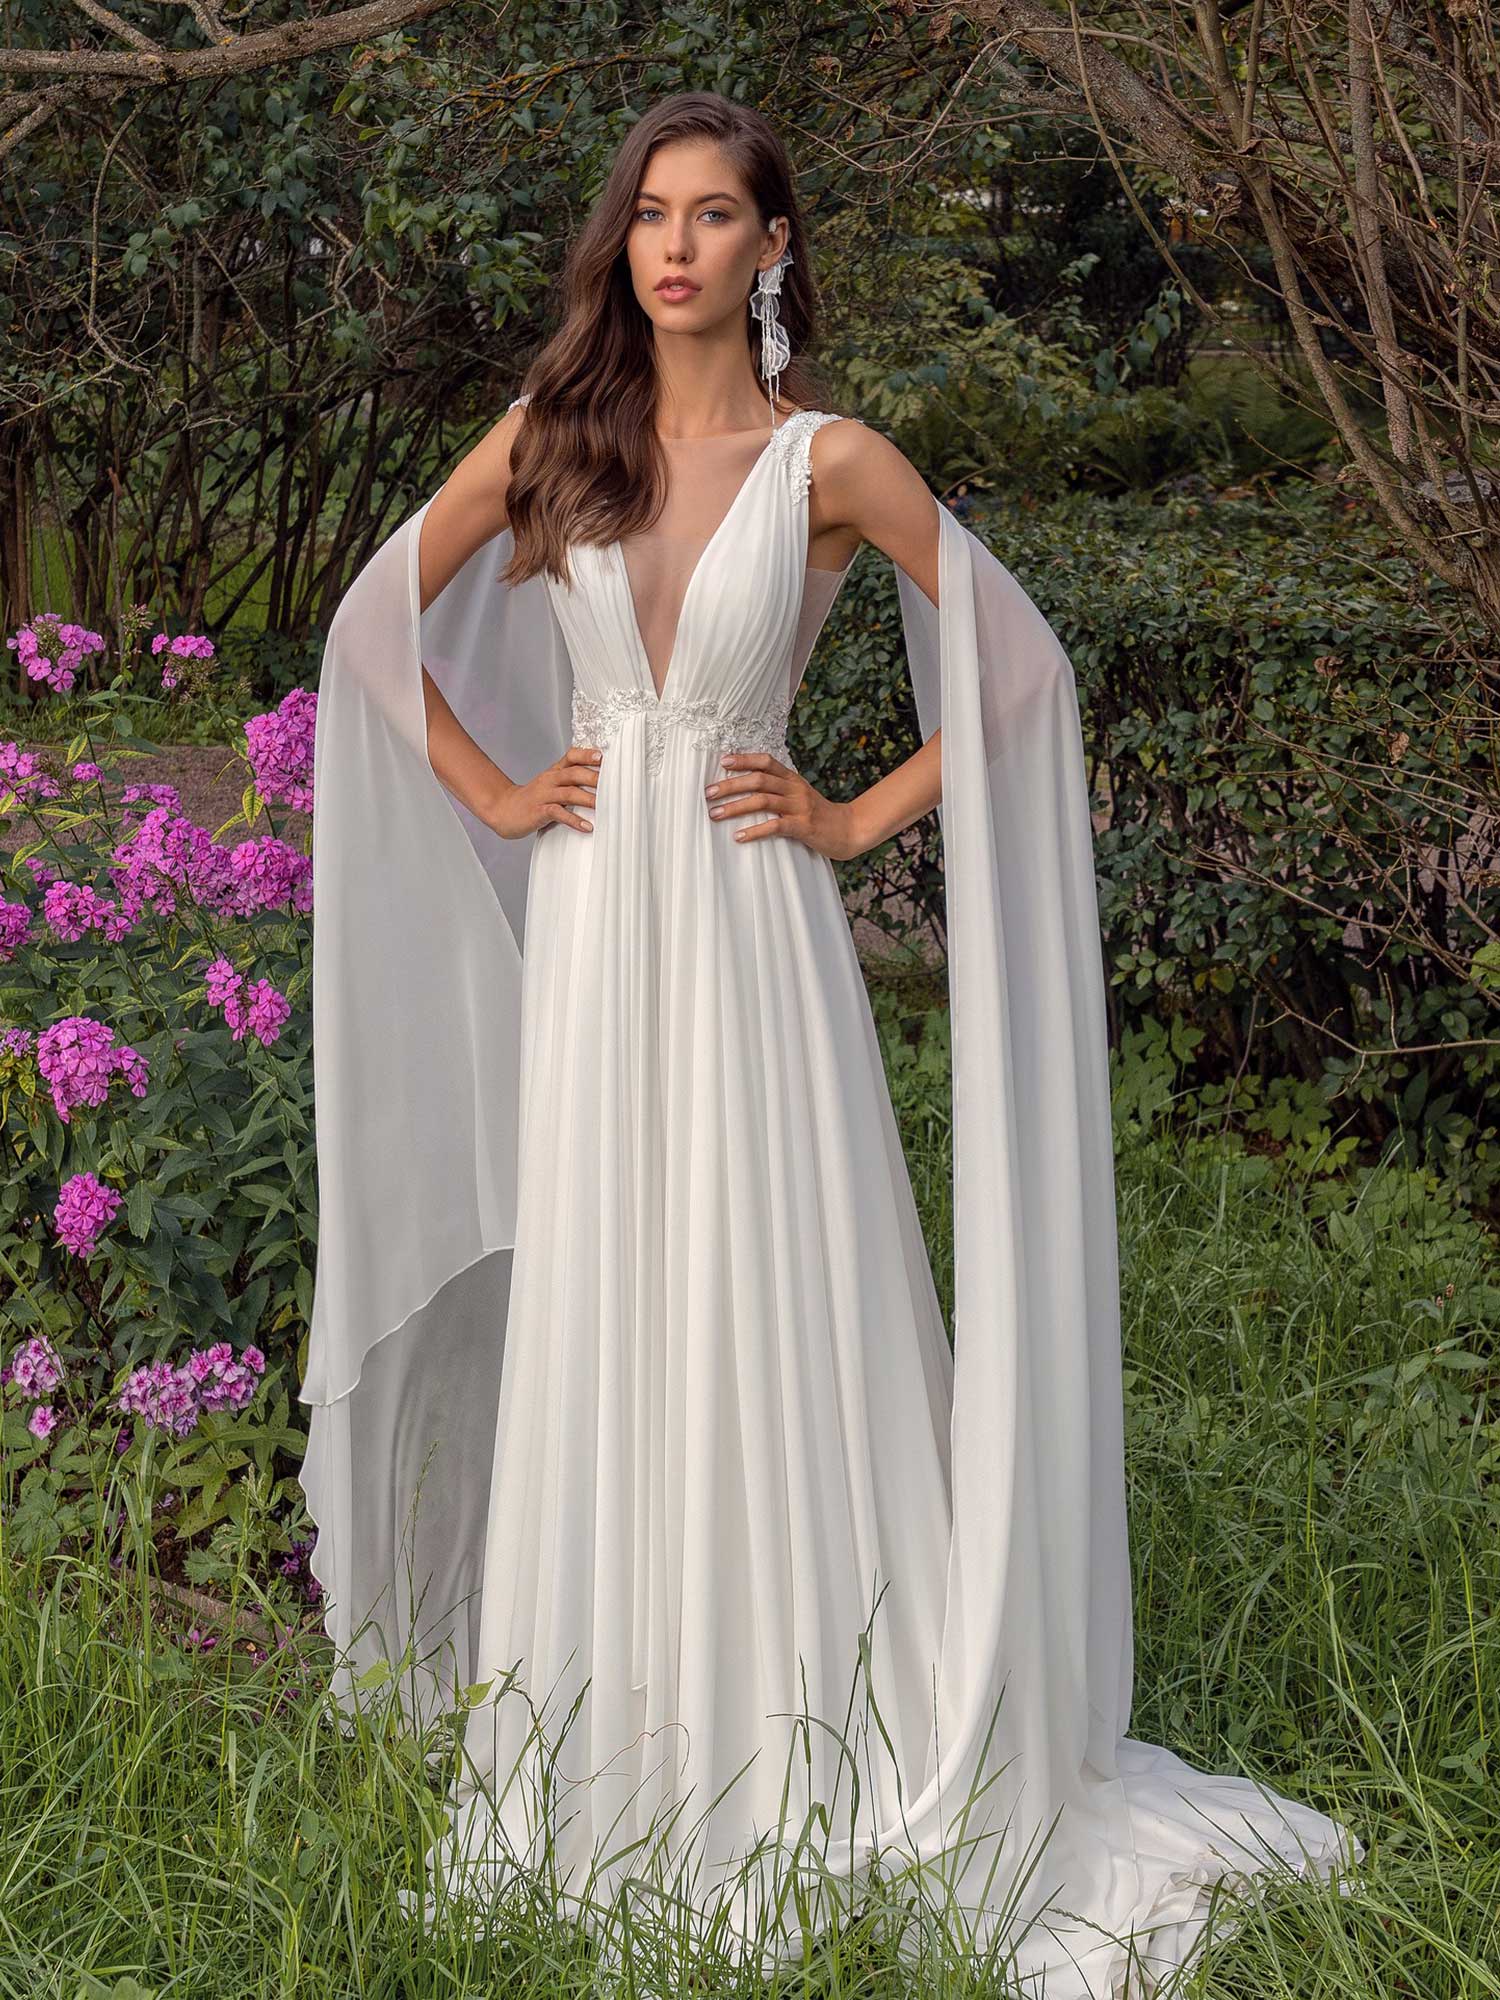 Plunging Neckline Chiffon Wedding Dress With Detachable Cape Sleeves And Open Back 7580